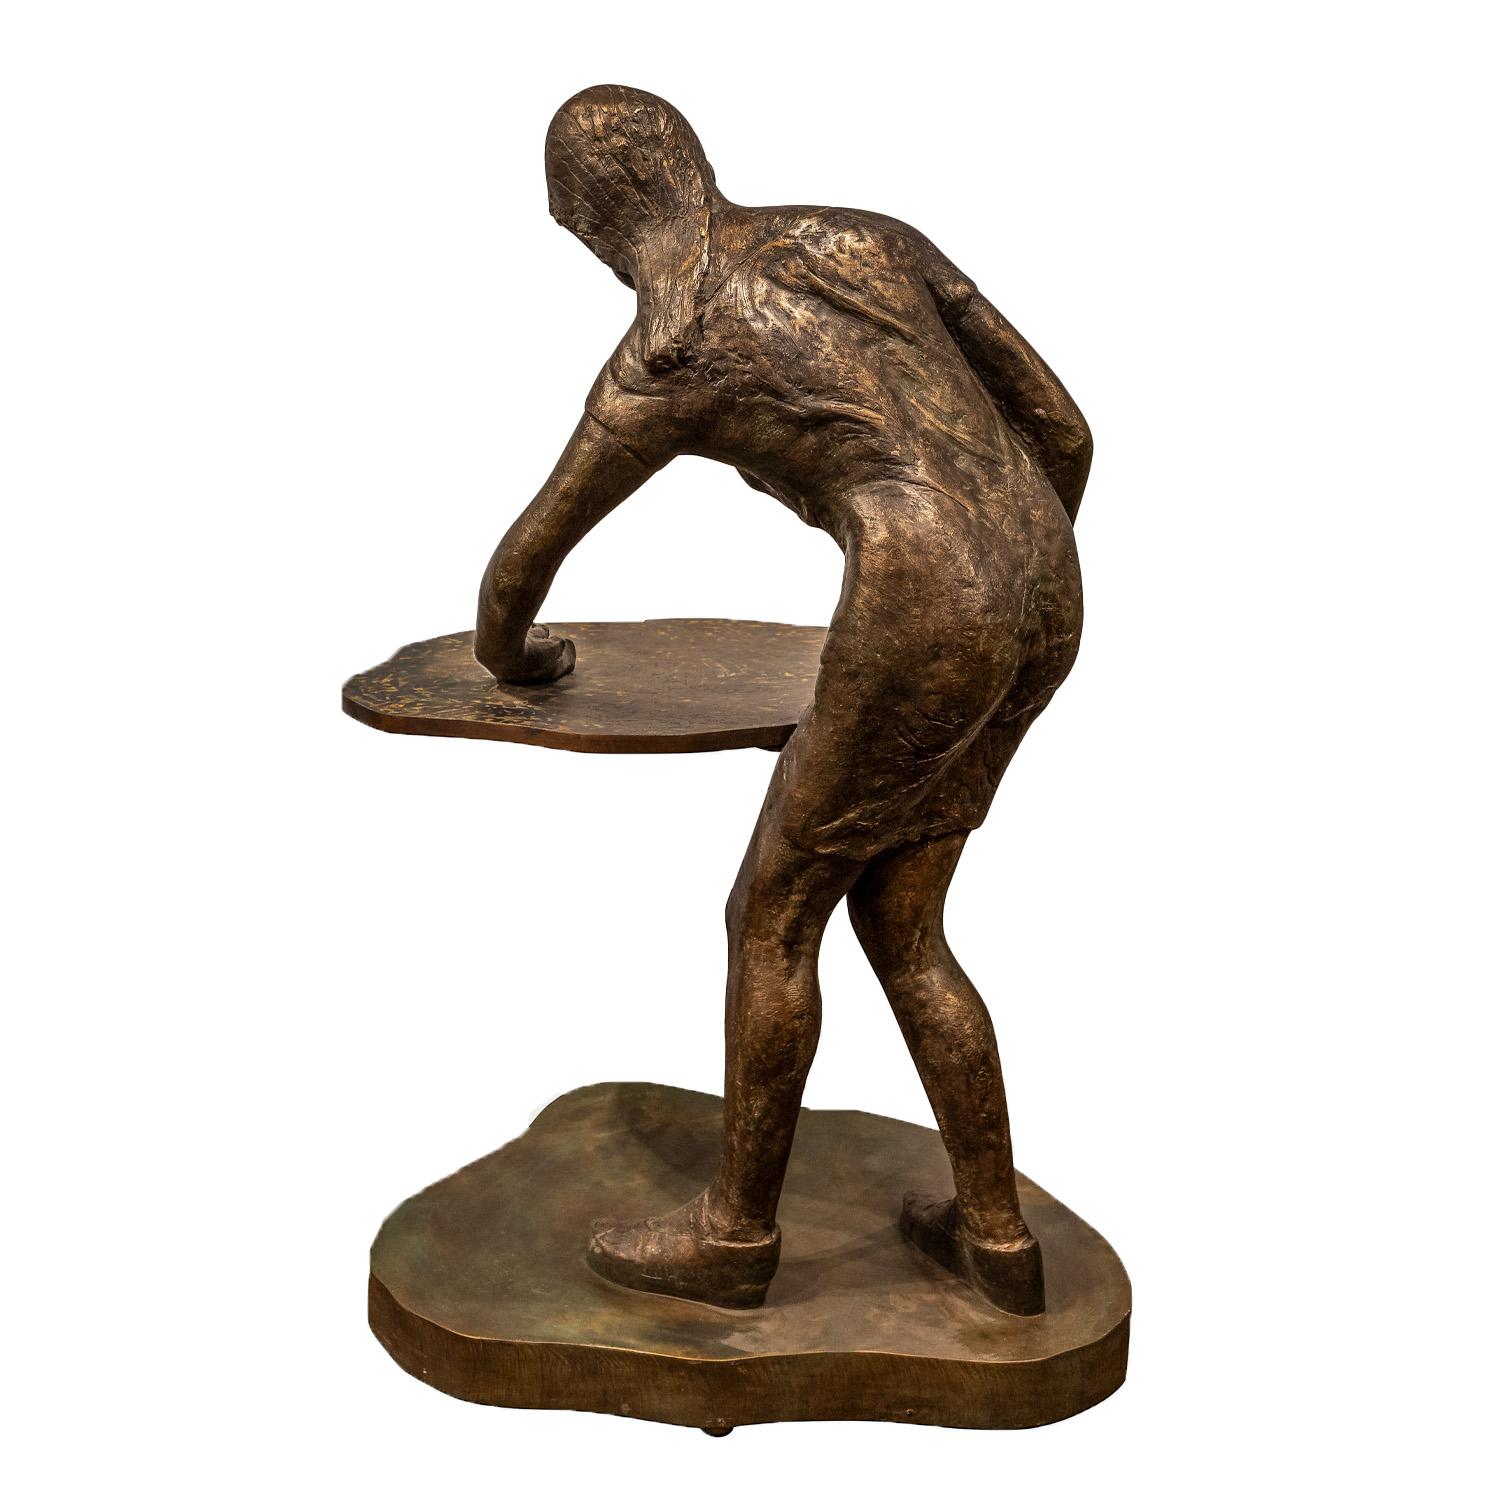 American Philip and Kelvin LaVerne Rare and Important Cast Sculpture 1960s (Signed) For Sale